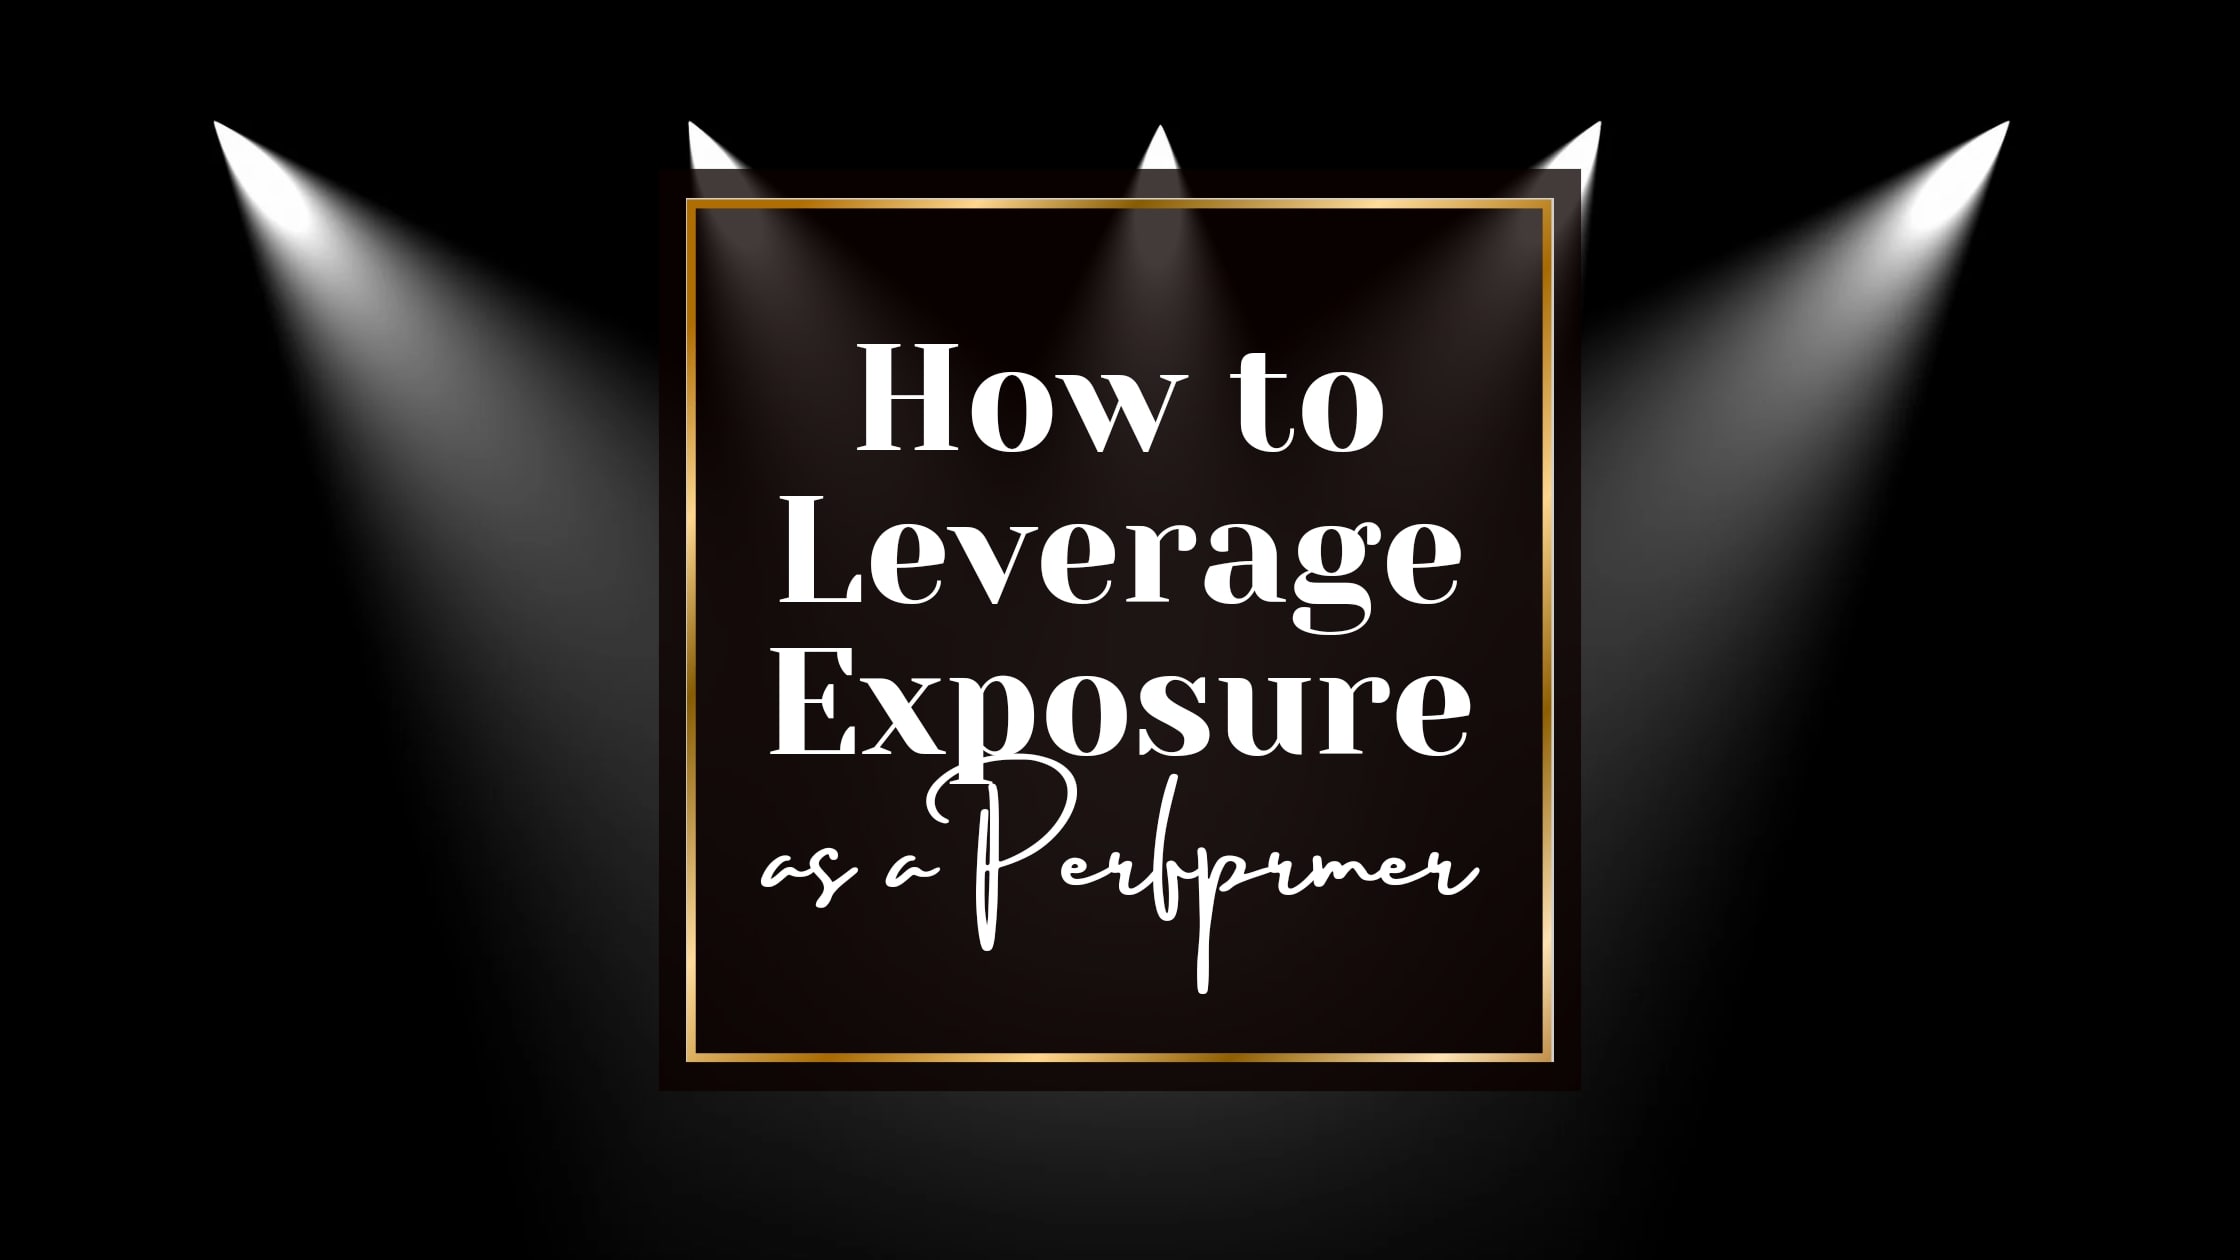 Don’t Die From Exposure!